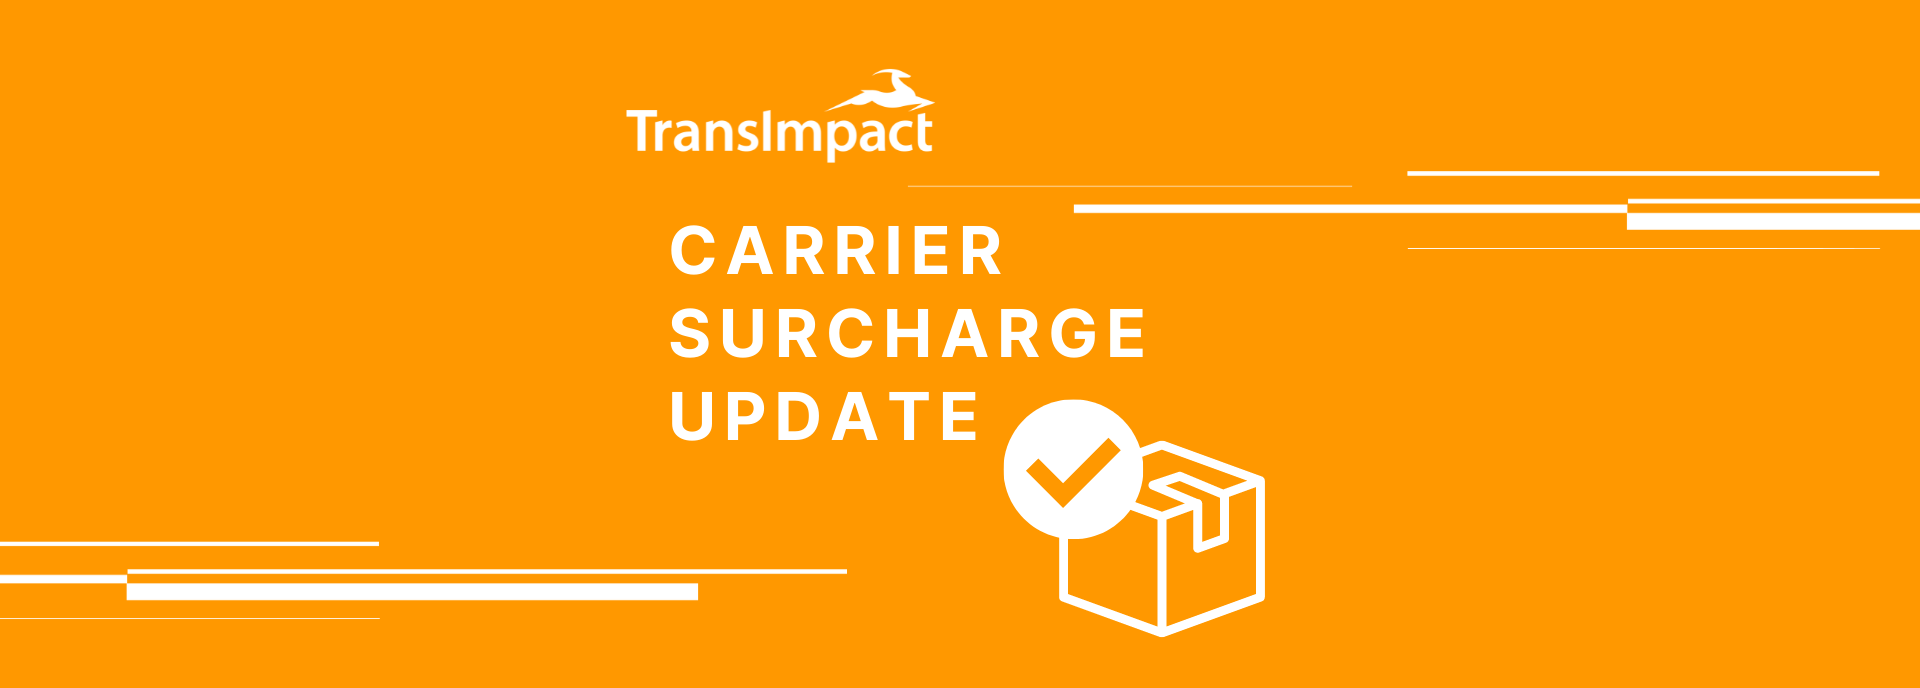 Carrier Surcharge update blog banner